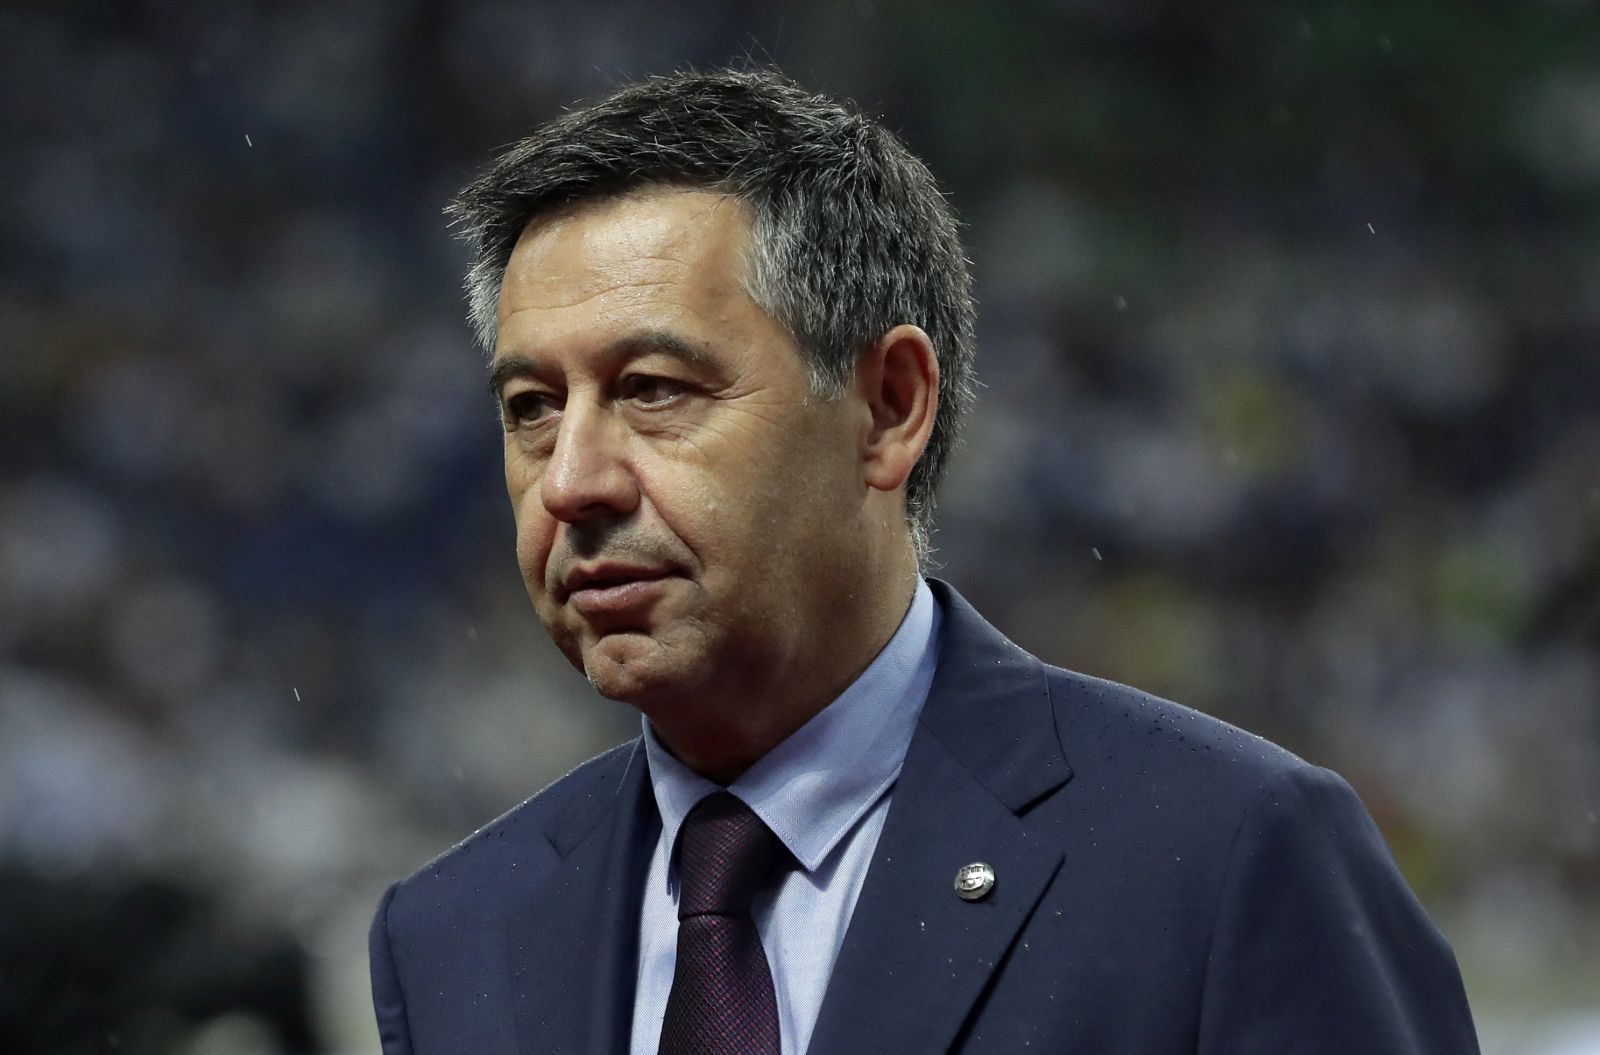 epa09044591 (FILE) - FC Barcelona's President Josep Maria Bartomeu is seen before a pre-season friendly soccer match between FC Barcelona and Chelsea FC in Saitama, north of Tokyo, Japan, 23 July 2019 (re-issued on 01 March 2021). Former FC Barcelona president Josep Maria Bartomeu, along with former director of the presidency area Jaume Masferrer, current director general of the club, Oscar Grau and head of the legal services ​​Roman Gomez Ponti, was arrested on 01 March 2021 as part of the investigation known as 'BarcaGate', judicial sources confirmed to Spanish national agency EFE.  EPA/KIYOSHI OTA *** Local Caption *** 55357134